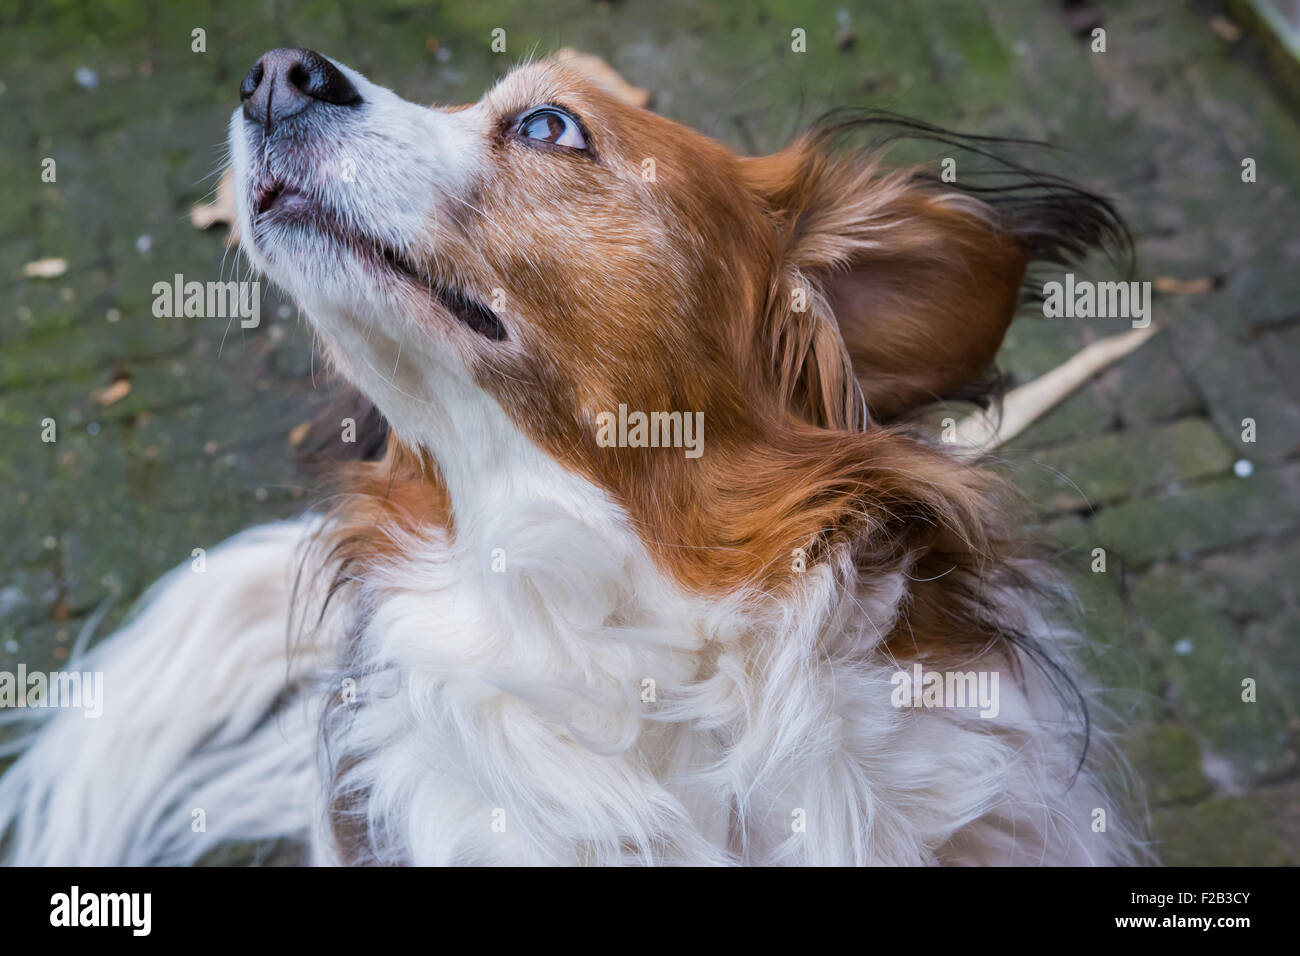 Dog posing with his head in the air Stock Photo